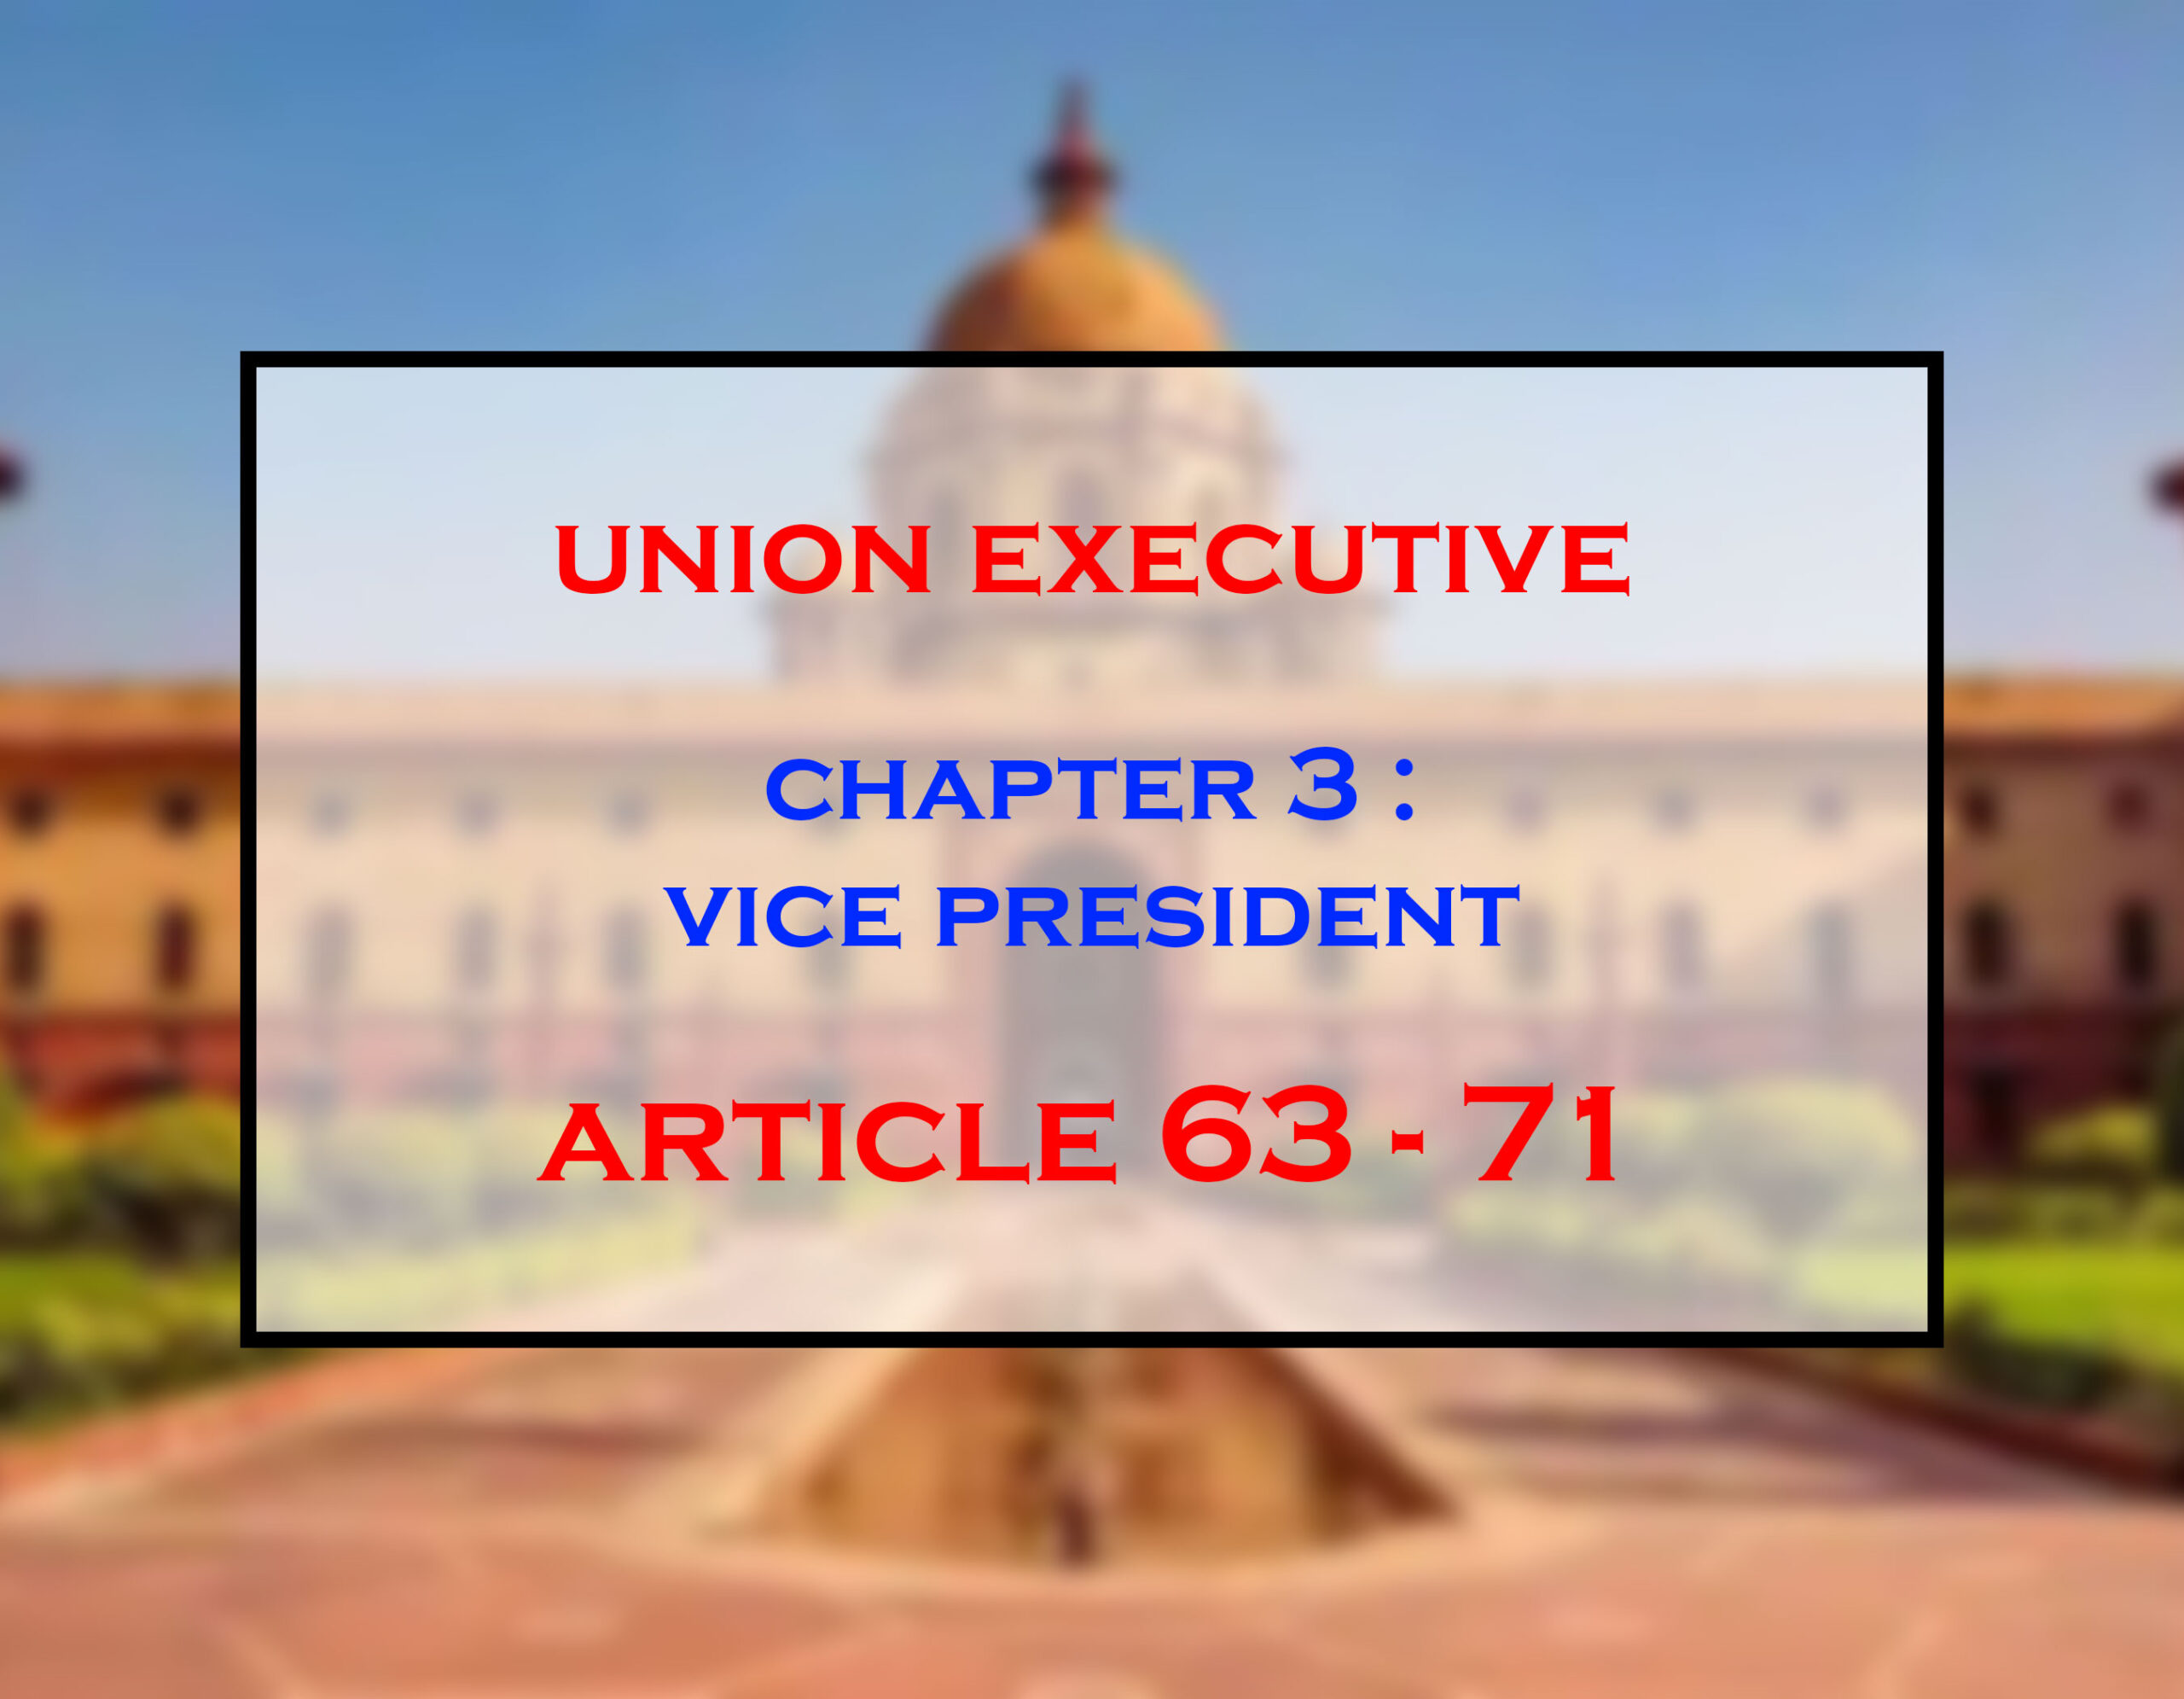 Vice President (Article 63-71)